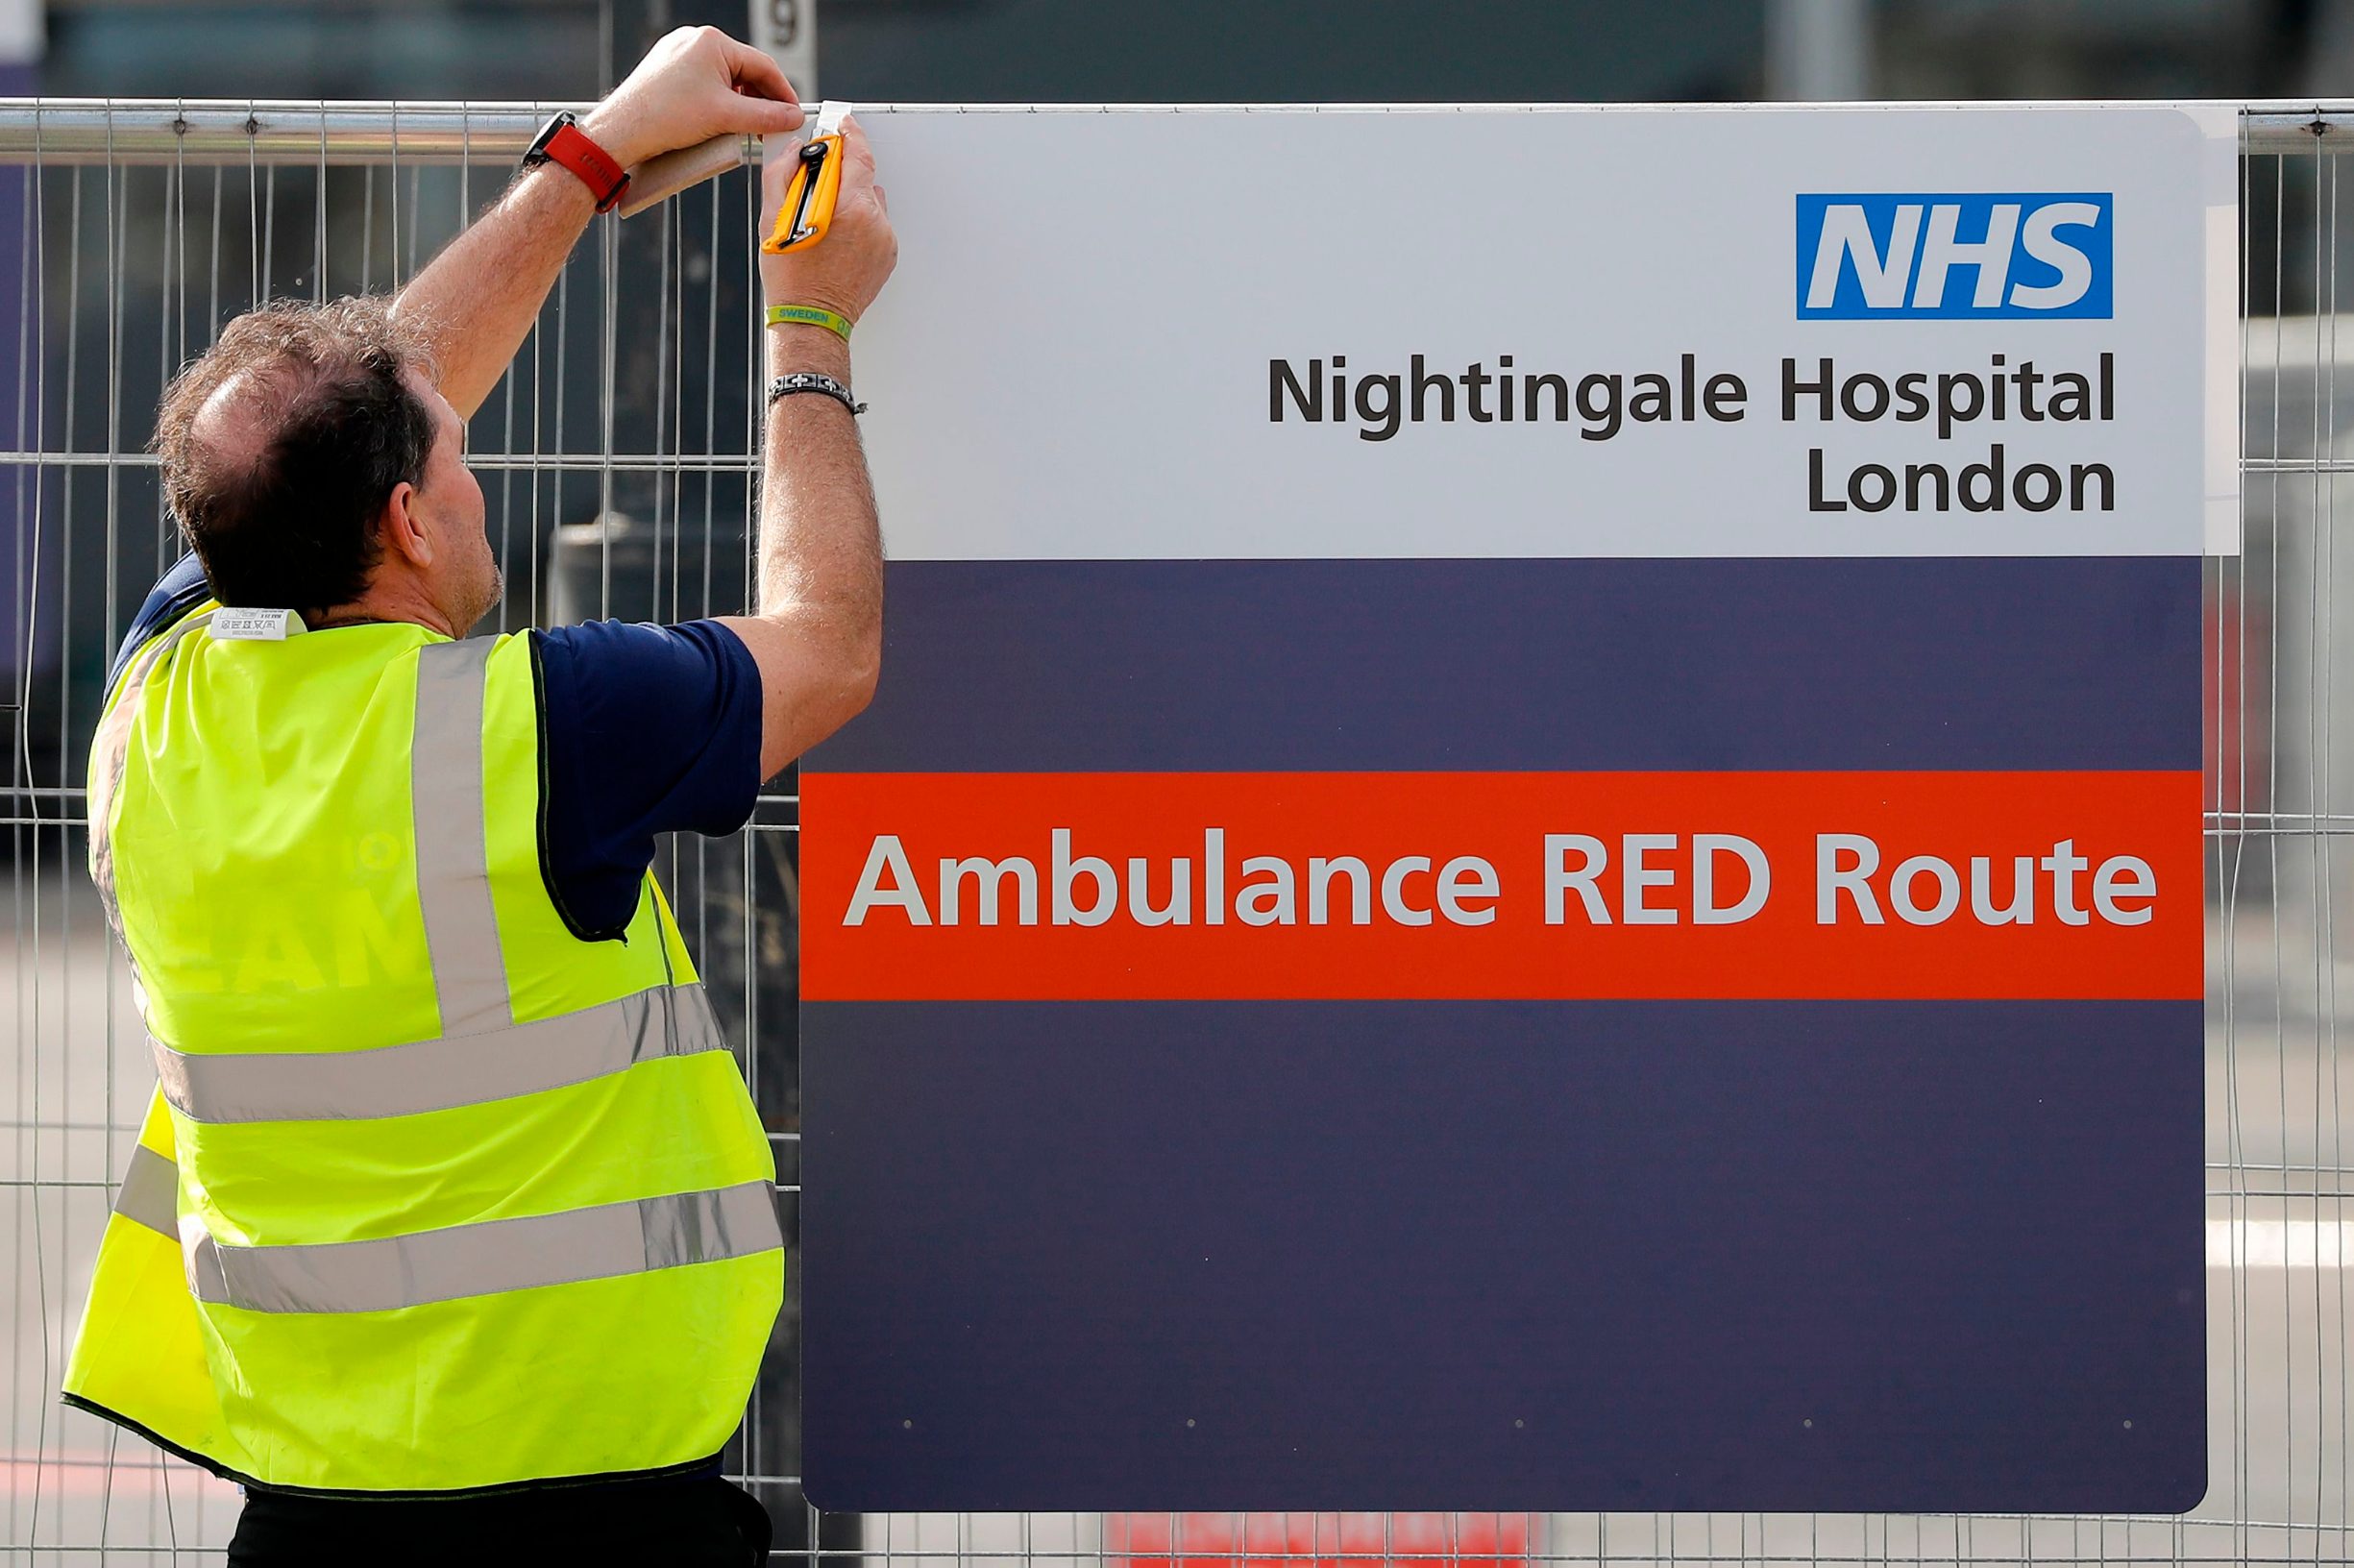 A worker affixes a new sign to a fence at the ExCeL London exhibition centre, which has been transformed into the 